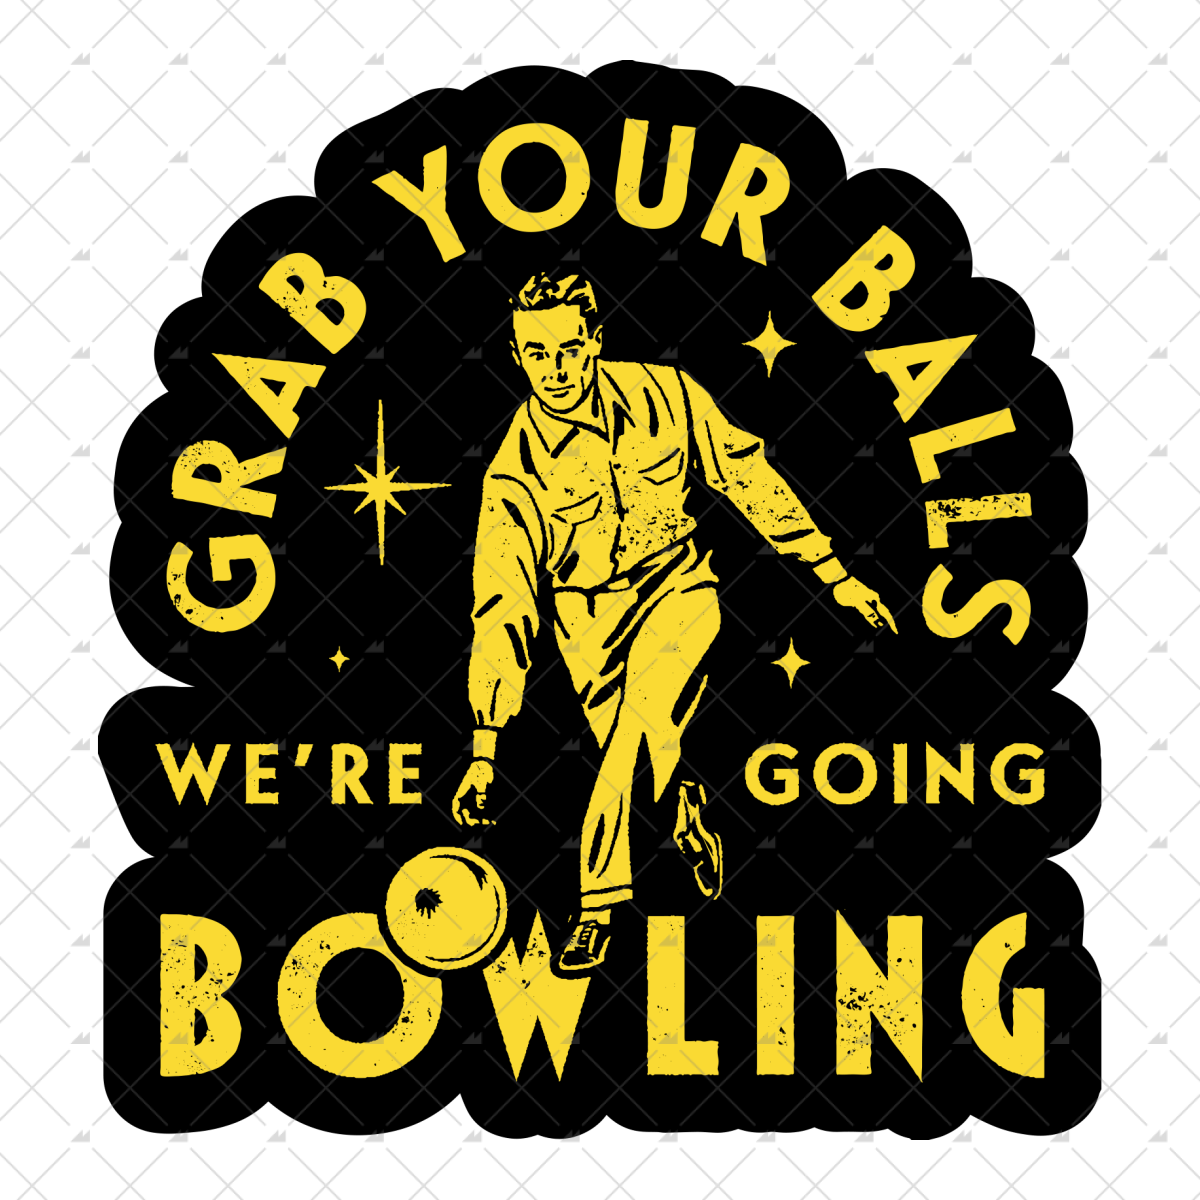 Grab Your Balls We're Going Bowling - Sticker